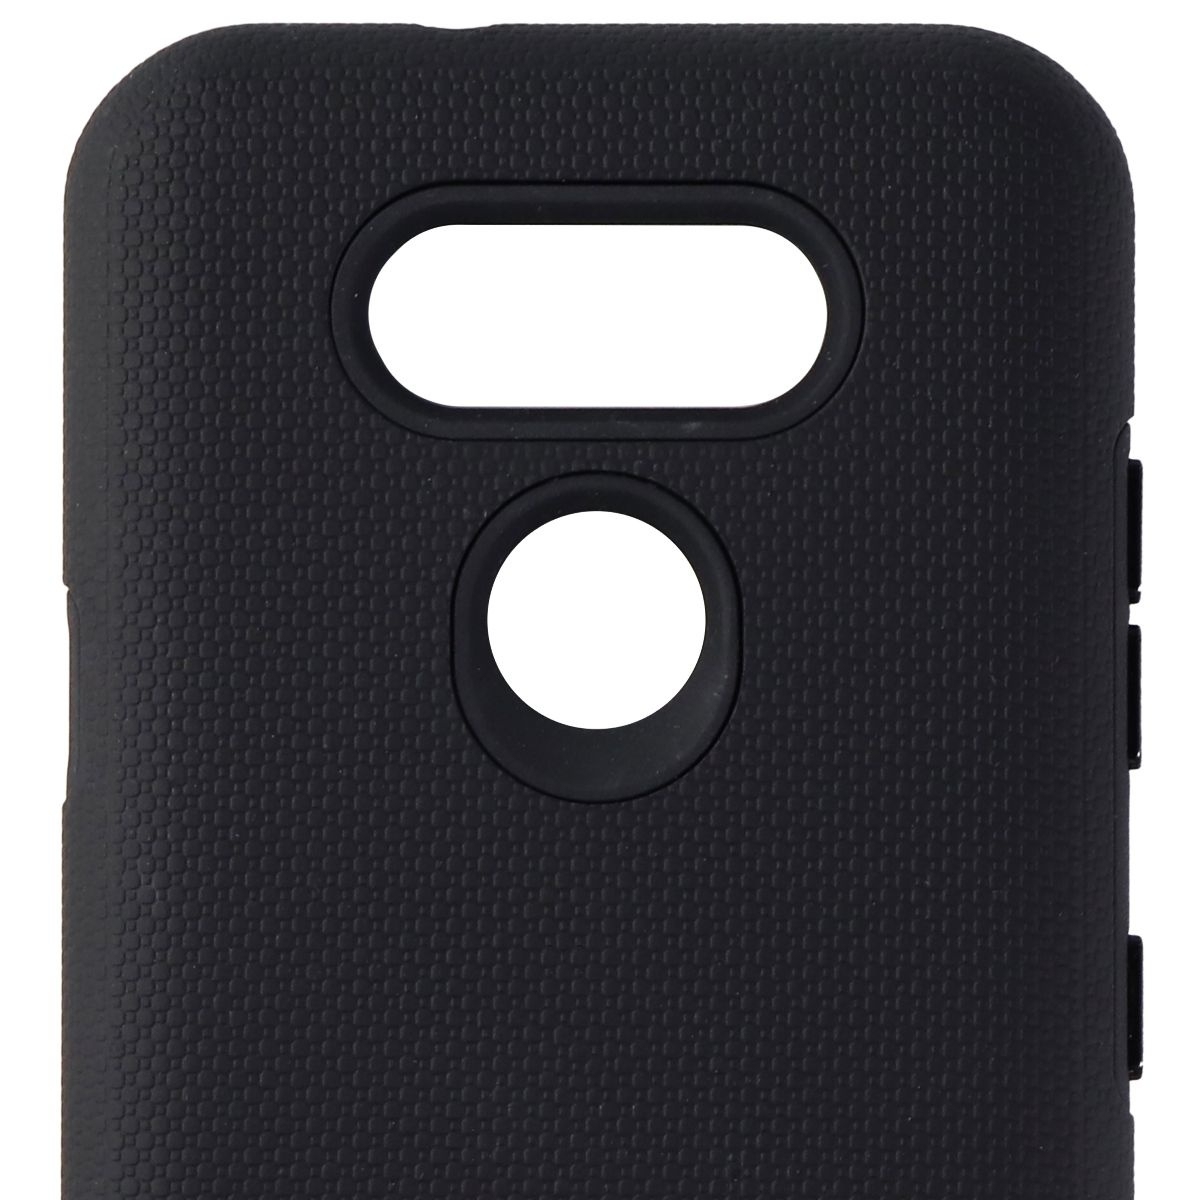 Axessorize PROTech Dual Layer Rugged Case For LG K8X - Black (LGR1920)